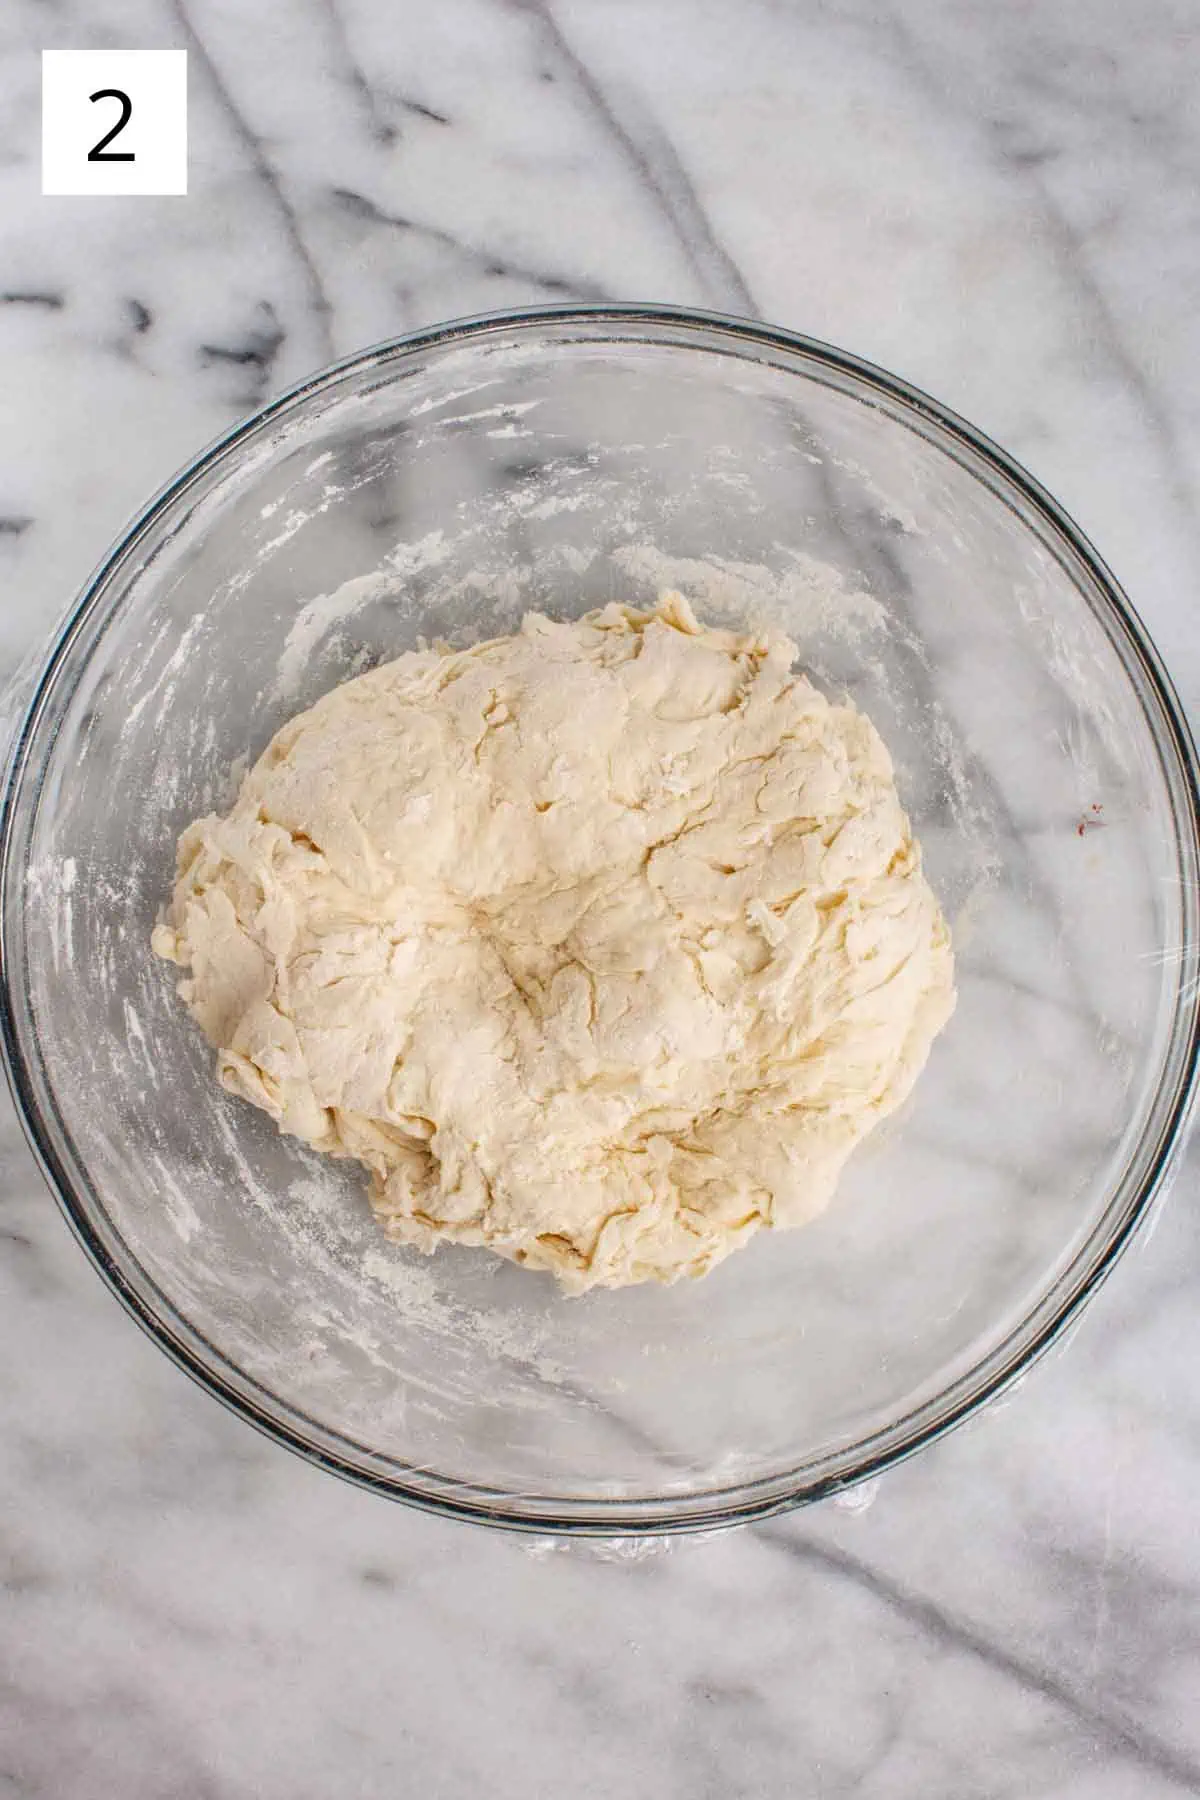 Forming a dough with recipe ingredients.